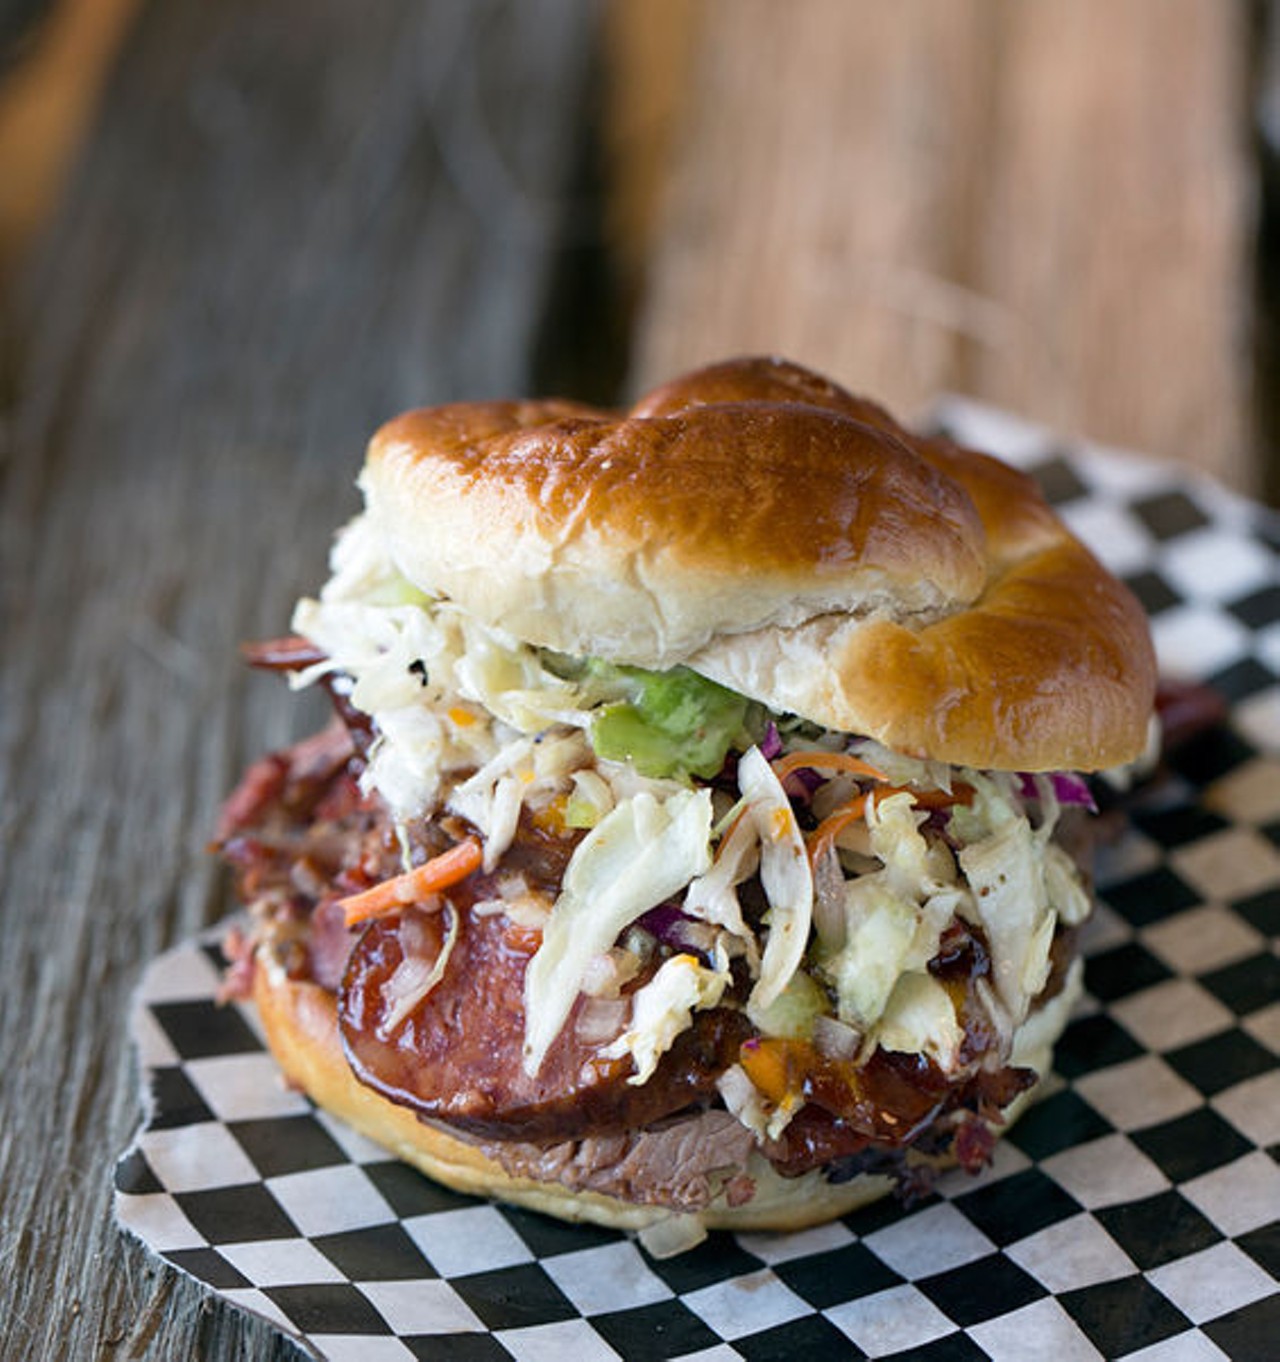 The "ASAP" is a beef-brisket sandwich slathered in spicy sauce and topped with hot link slices and crispy cole slaw. See more photos: Inside BBQ ASAP on Manchester.